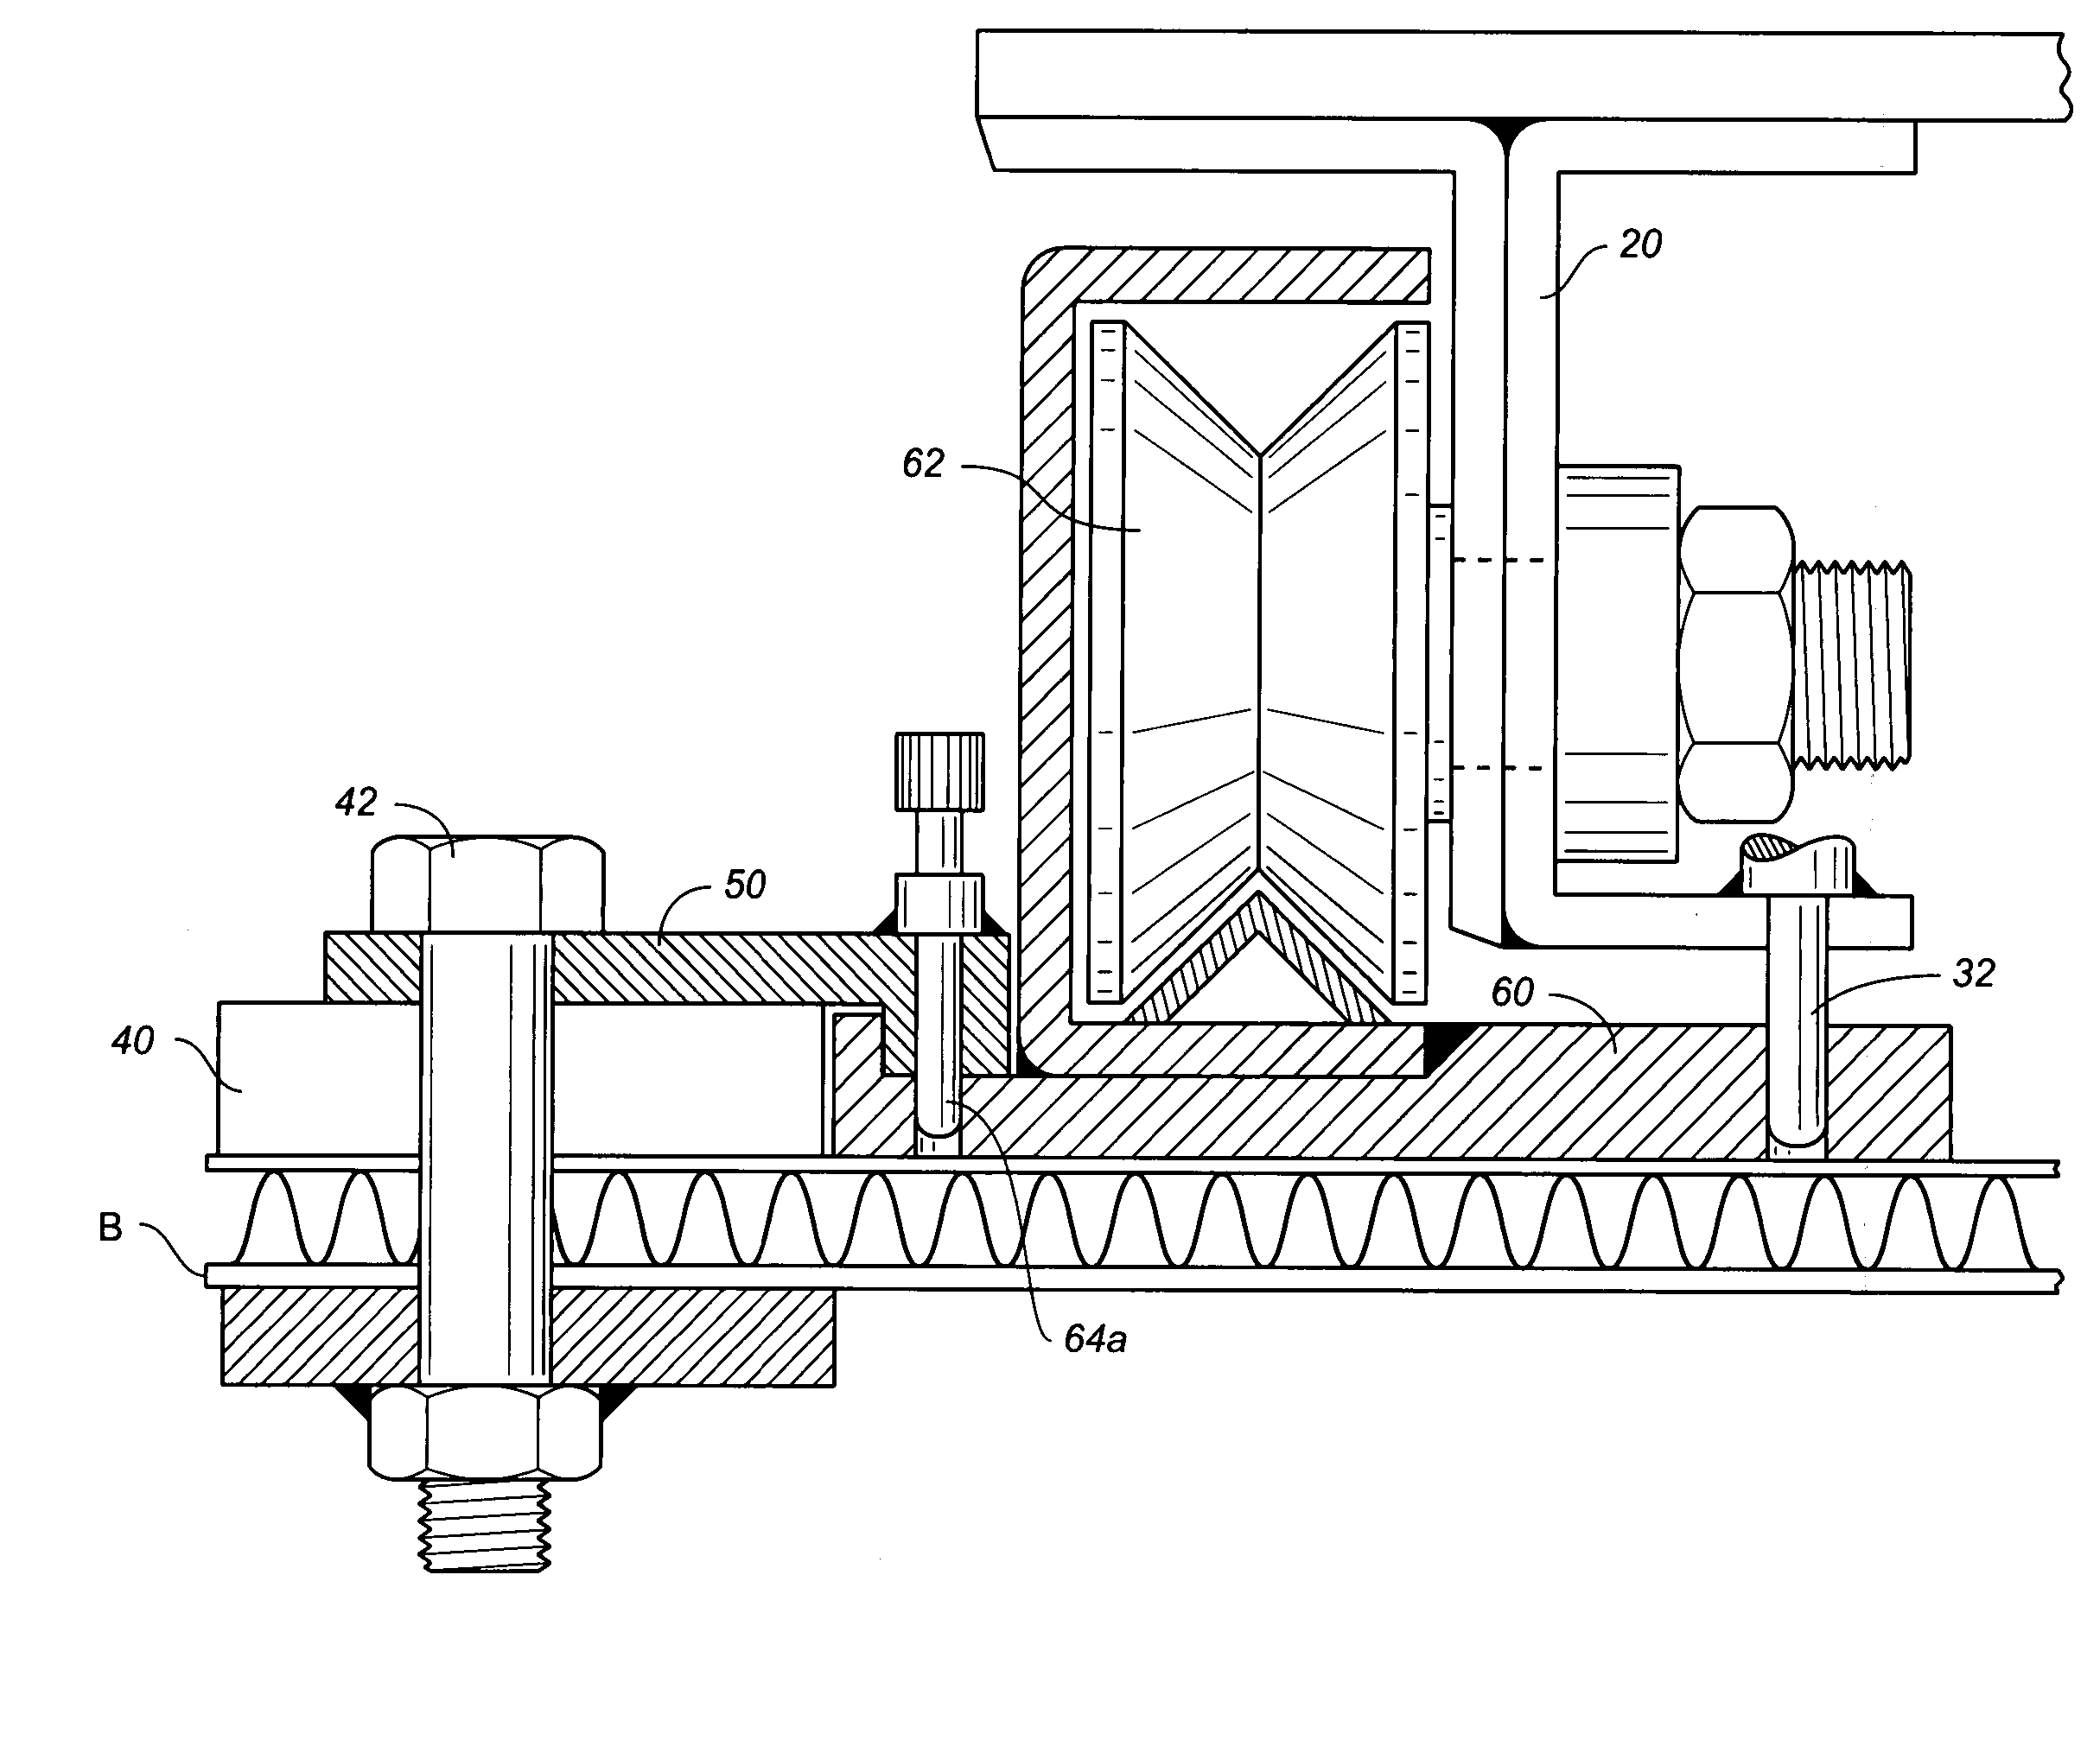 Utility table and tool storage apparatus for truck beds